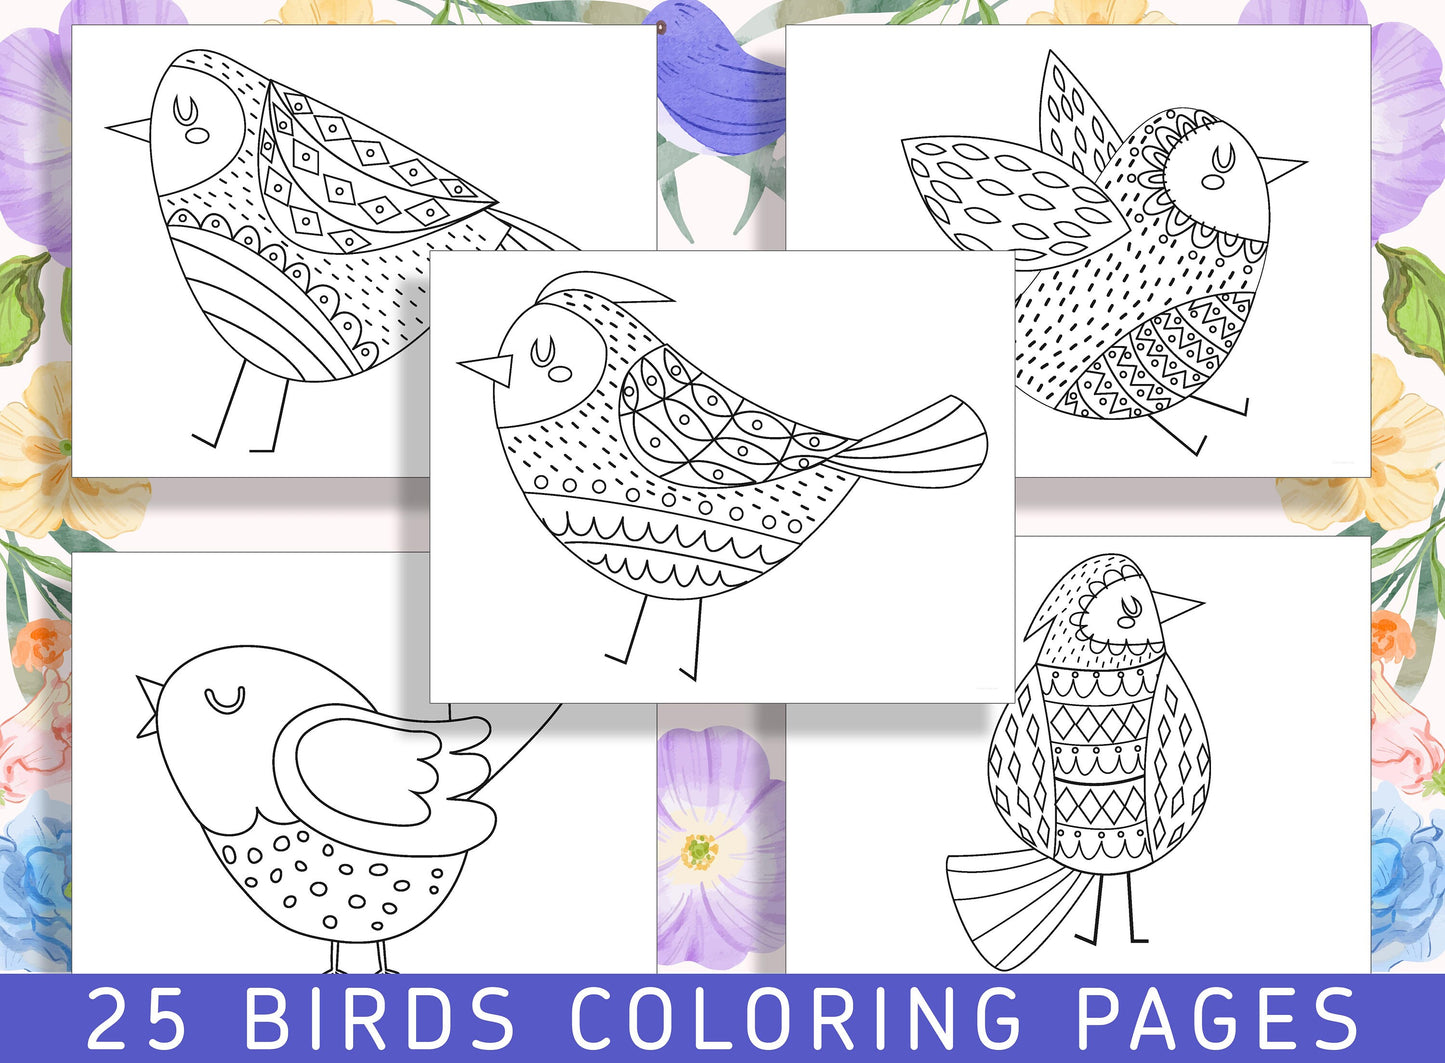 Colorful World of Birds: 25 Pages of Avian Beauty to Color, PDF File, Instant Download